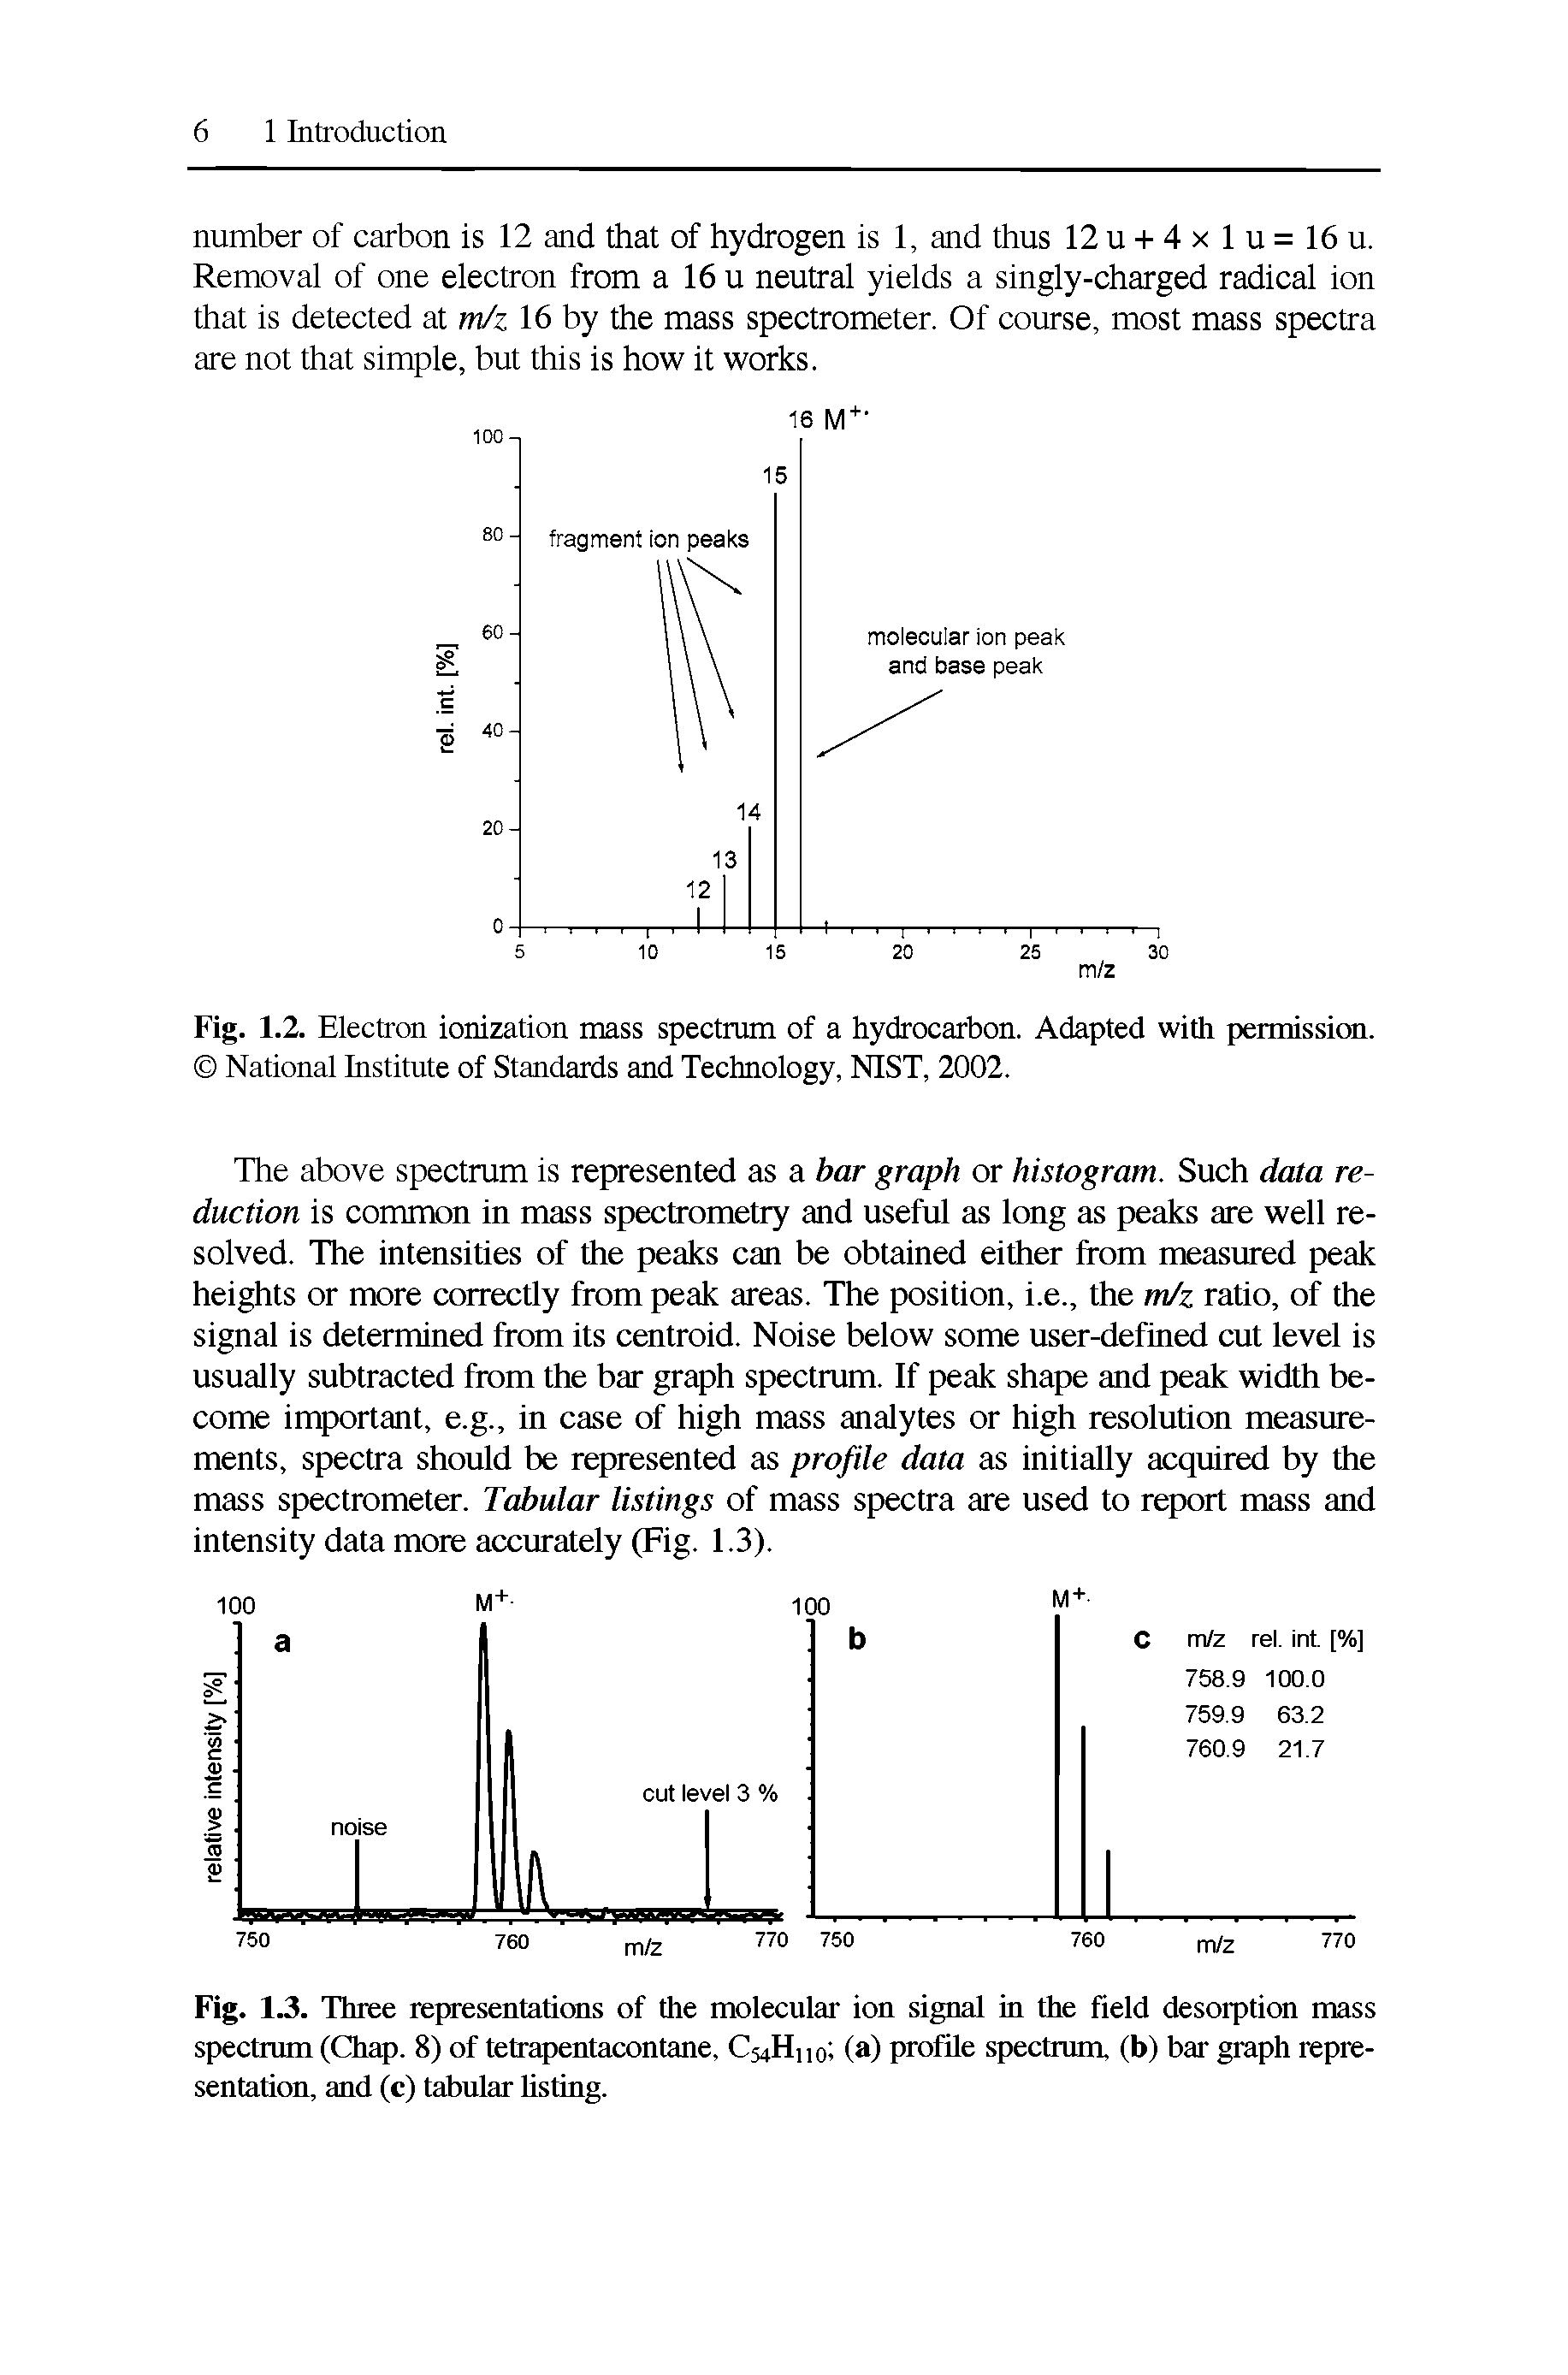 Fig. 1.2. Electron ionization mass spectrum of a hydrocarbon. Adapted with permission. National Institute of Standards and Technology, NIST, 2002.